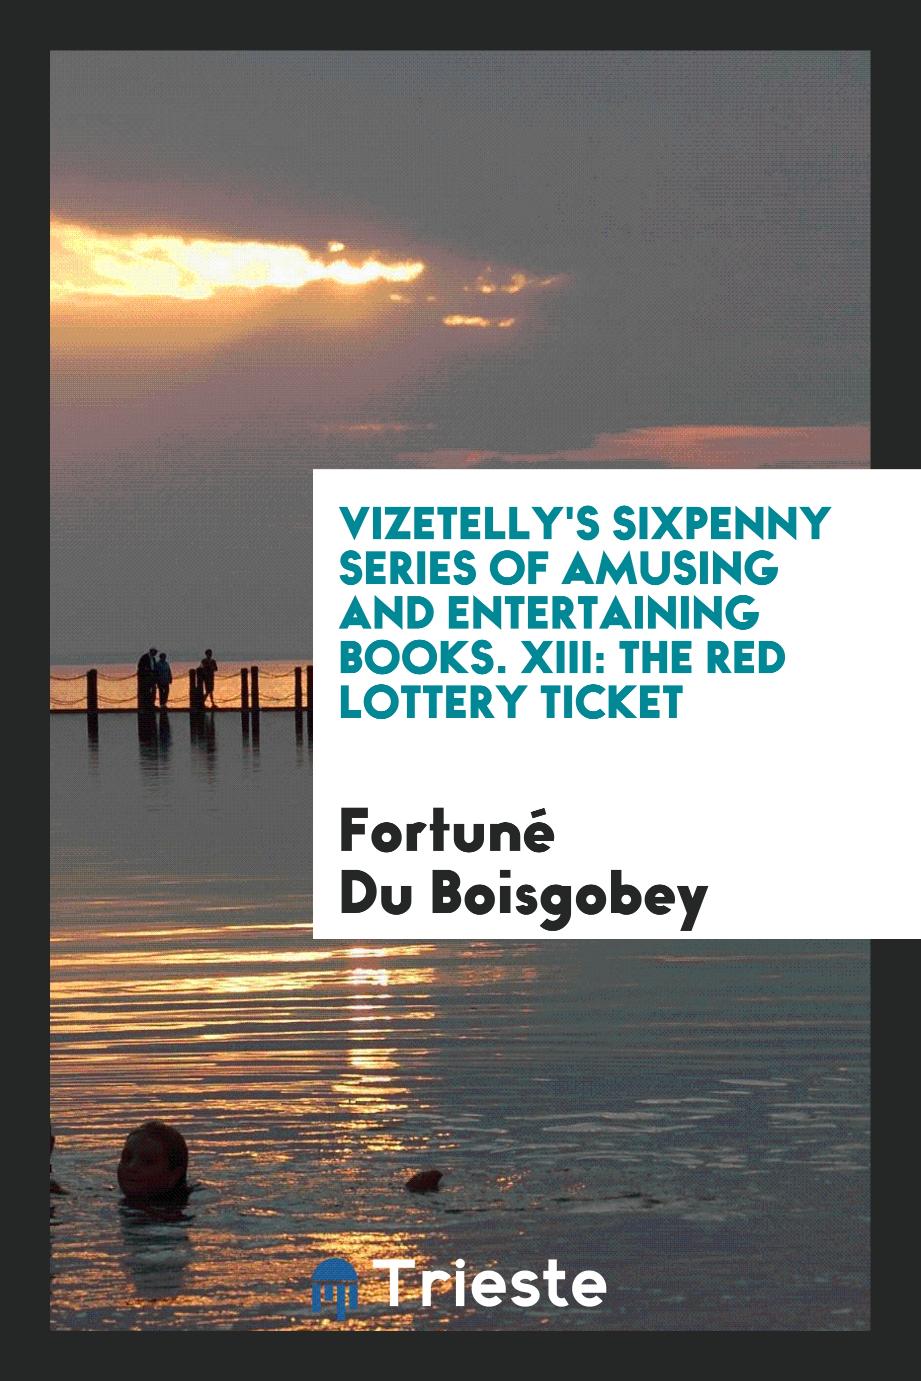 Vizetelly's Sixpenny Series of Amusing and Entertaining Books. XIII: The Red Lottery Ticket